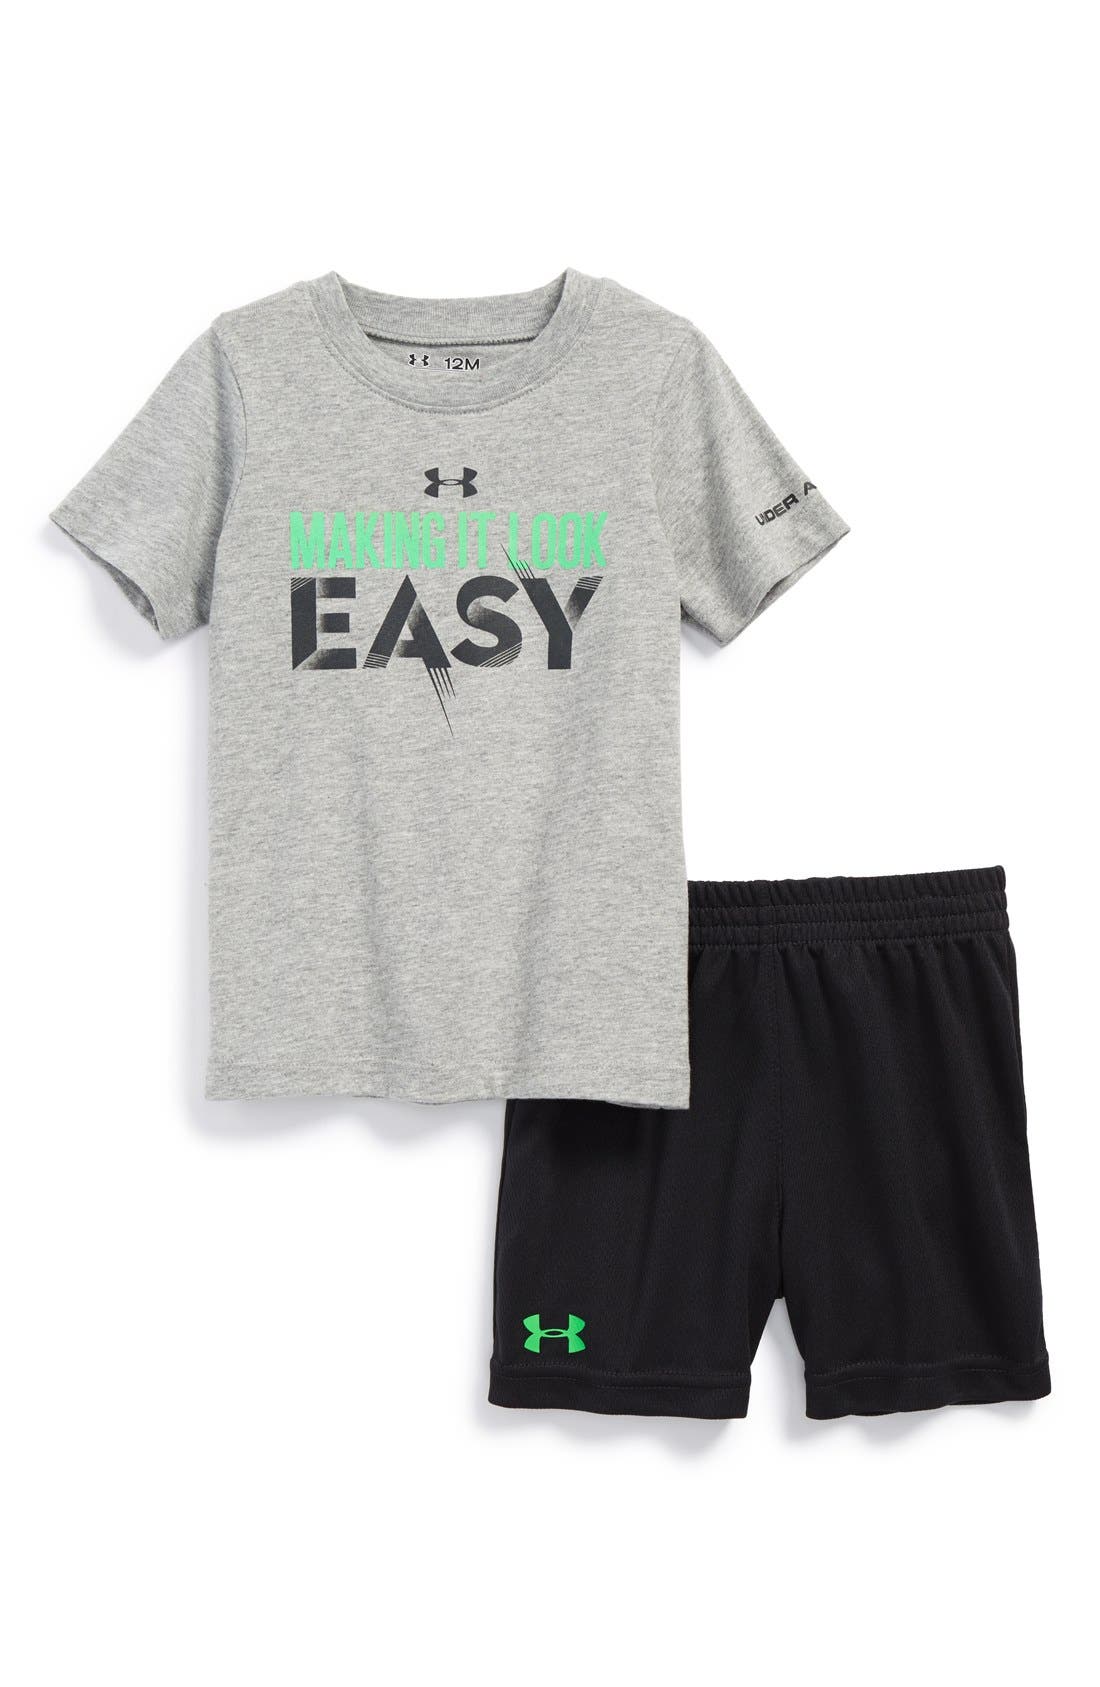 baby under armour outfits